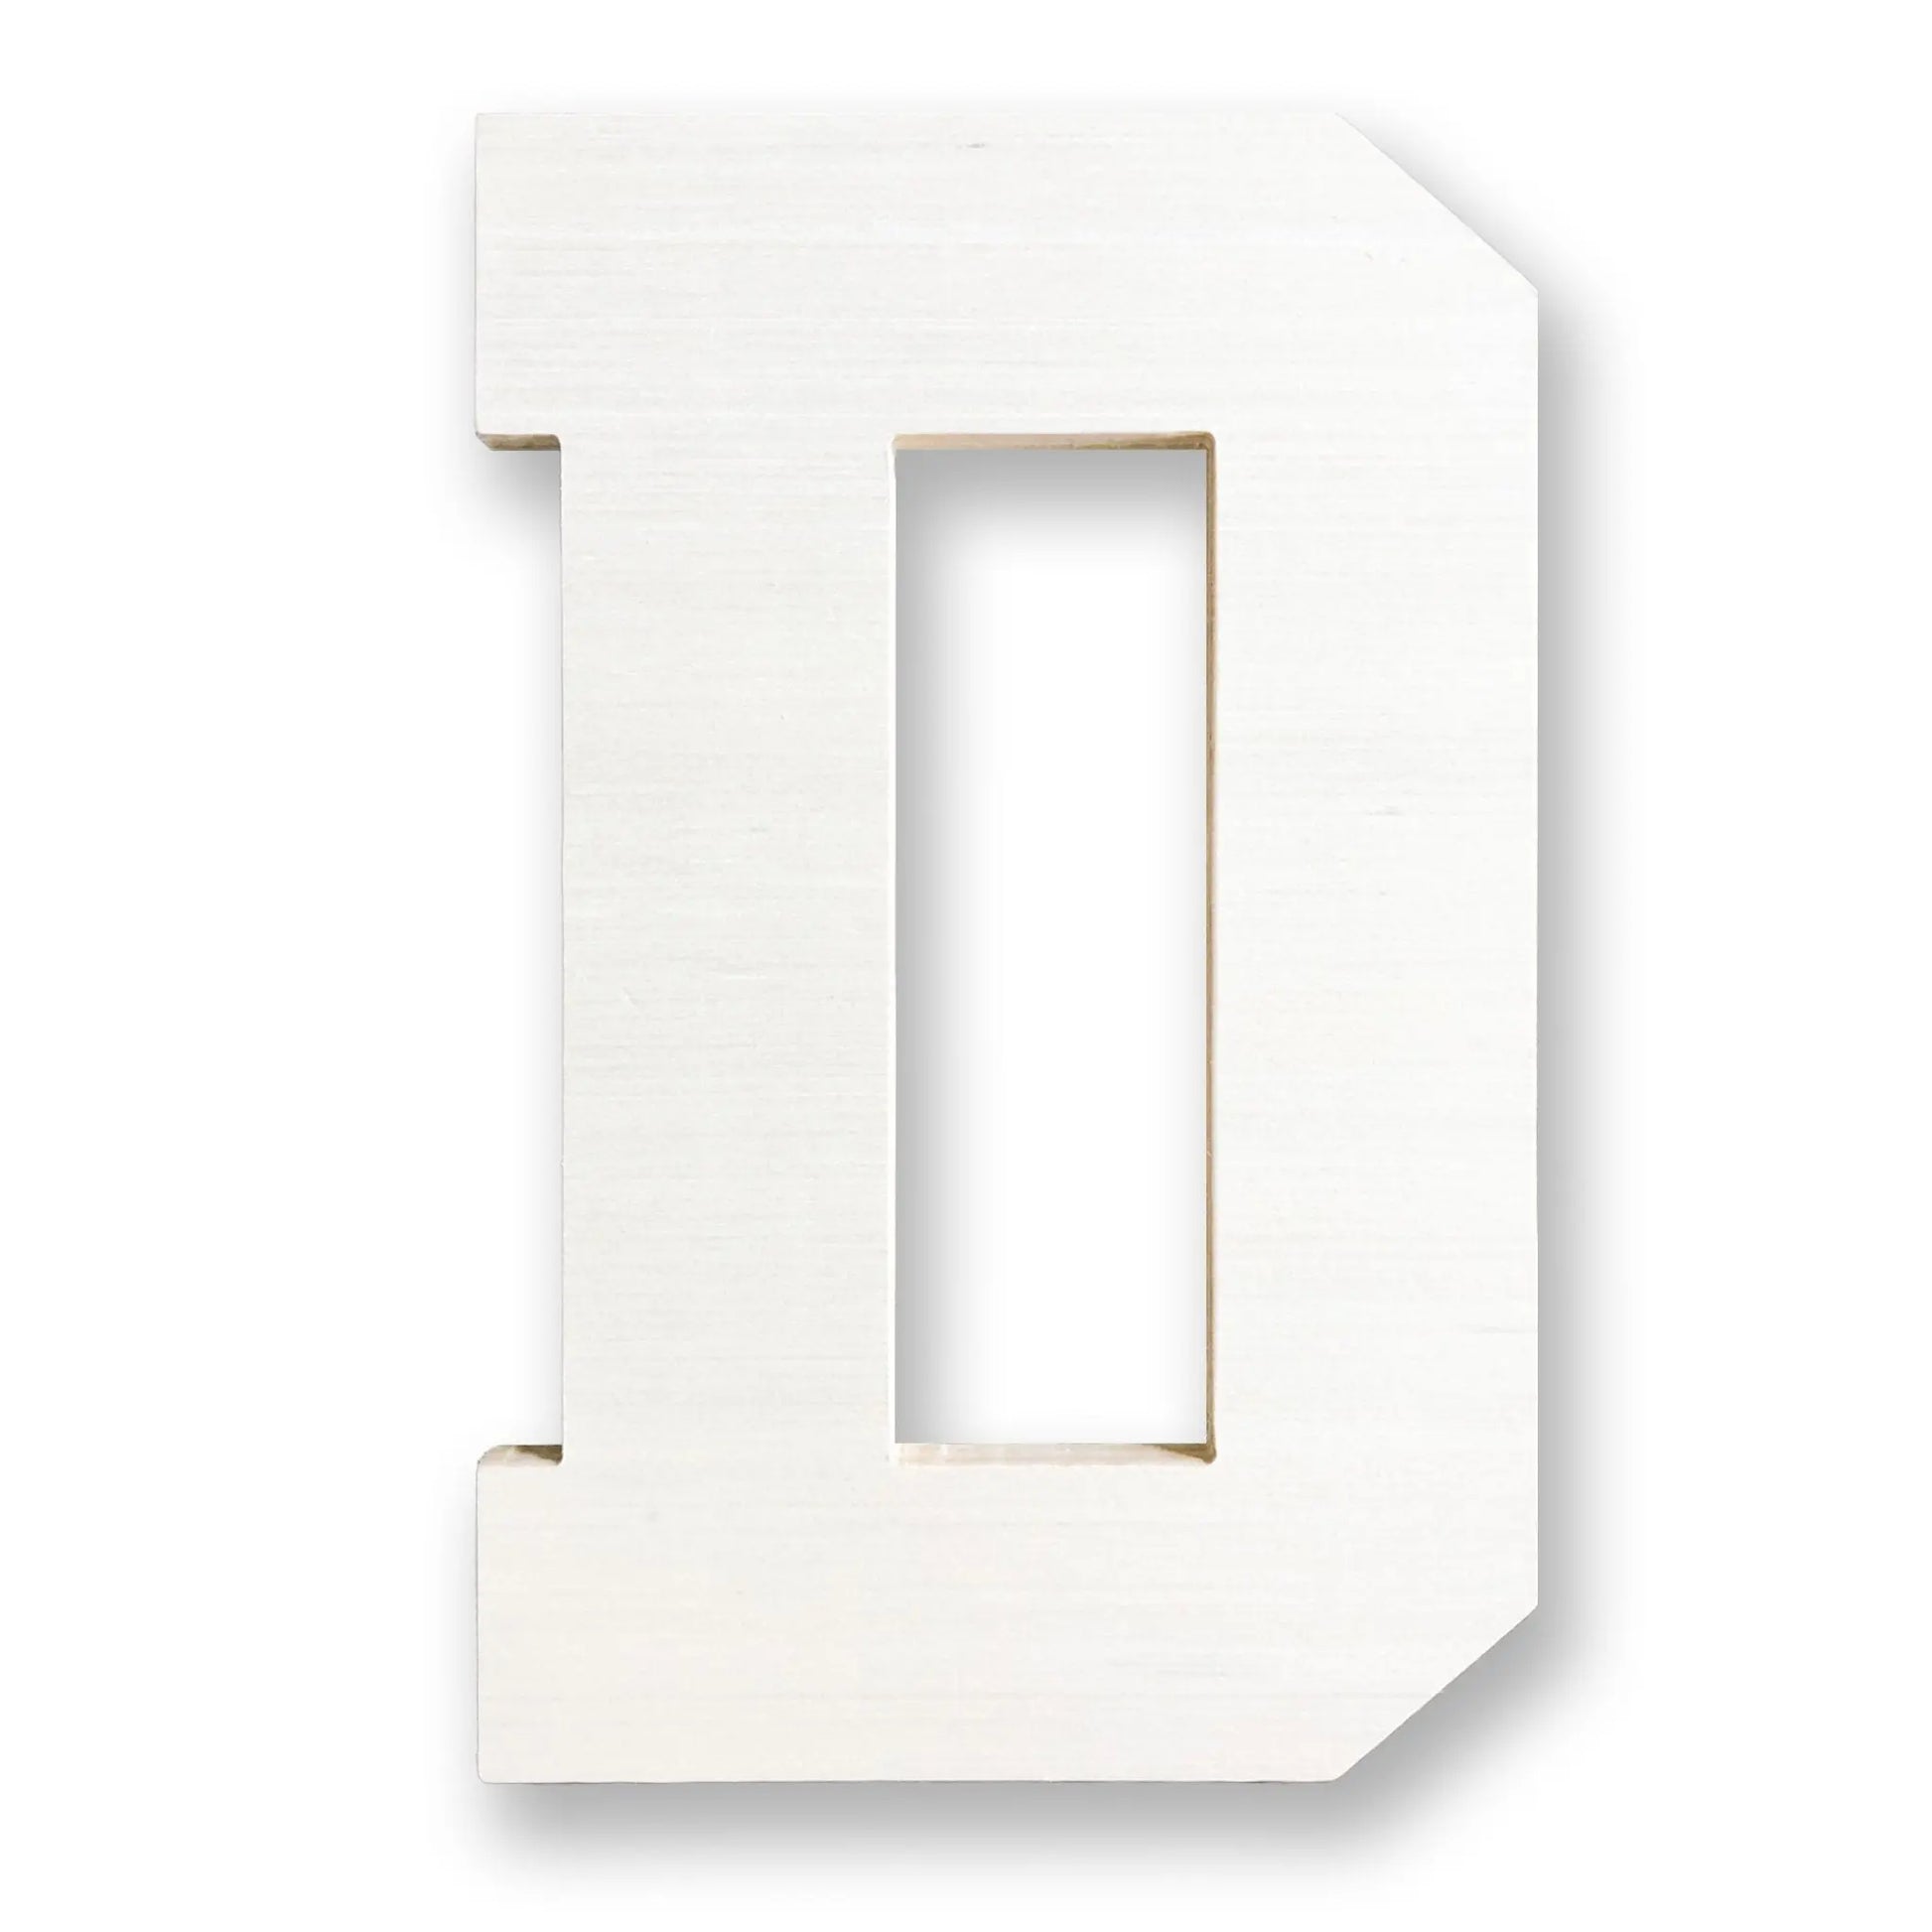 18 Inch Wood Letters: Love love love it! Ordering 2 more!